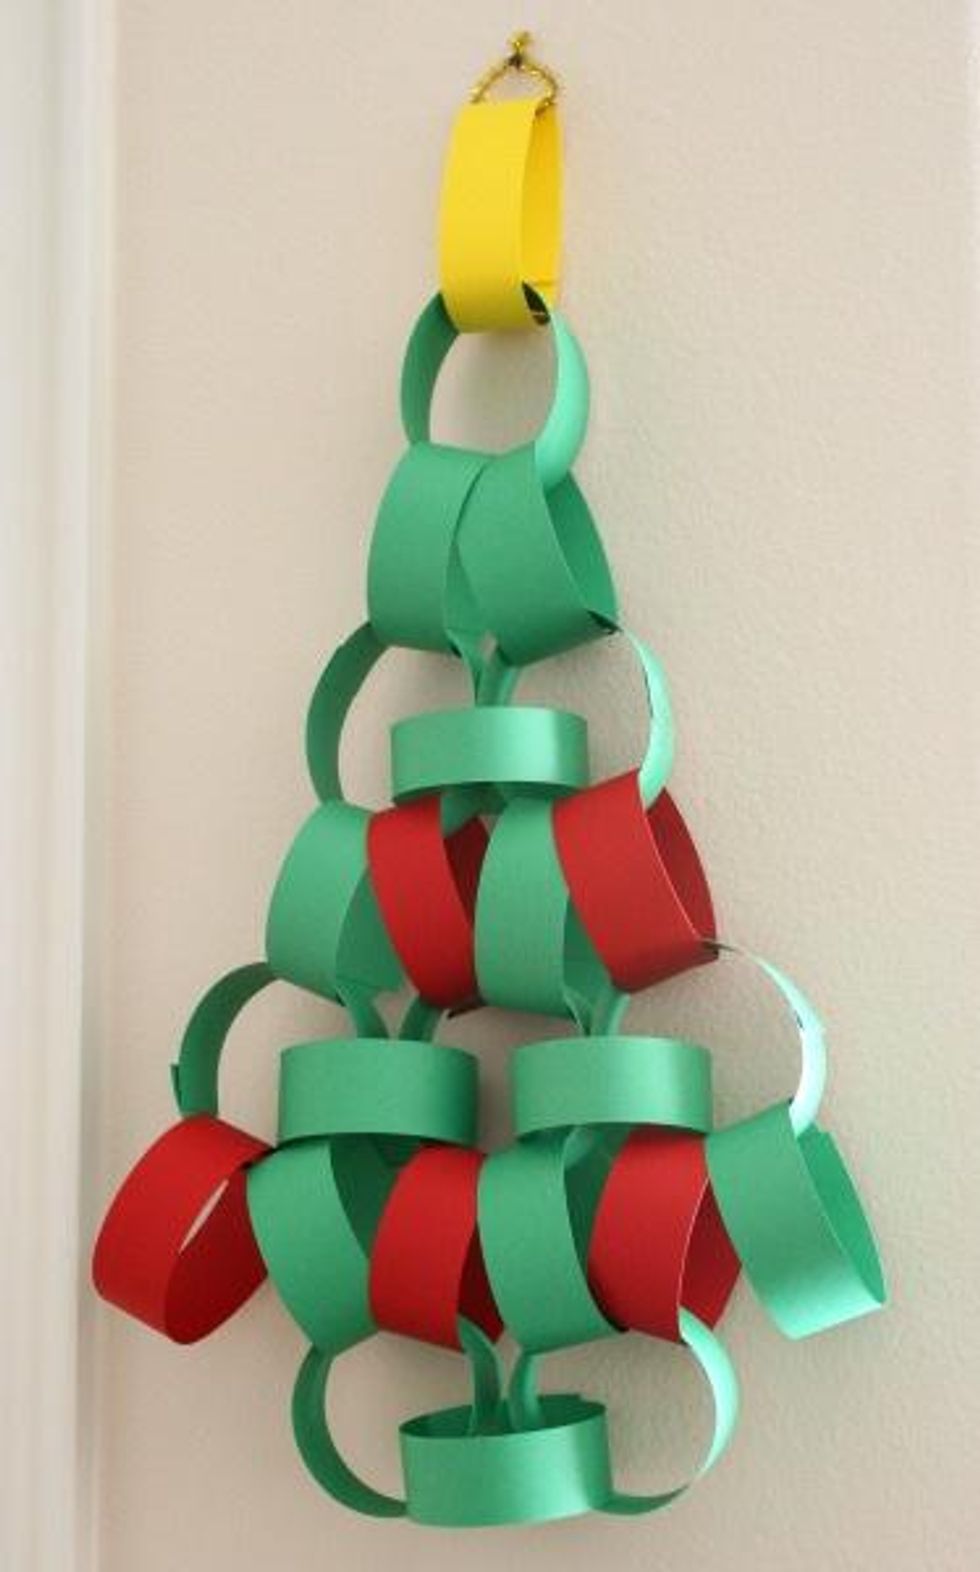 How to make a paper chain christmas tree - B+C Guides